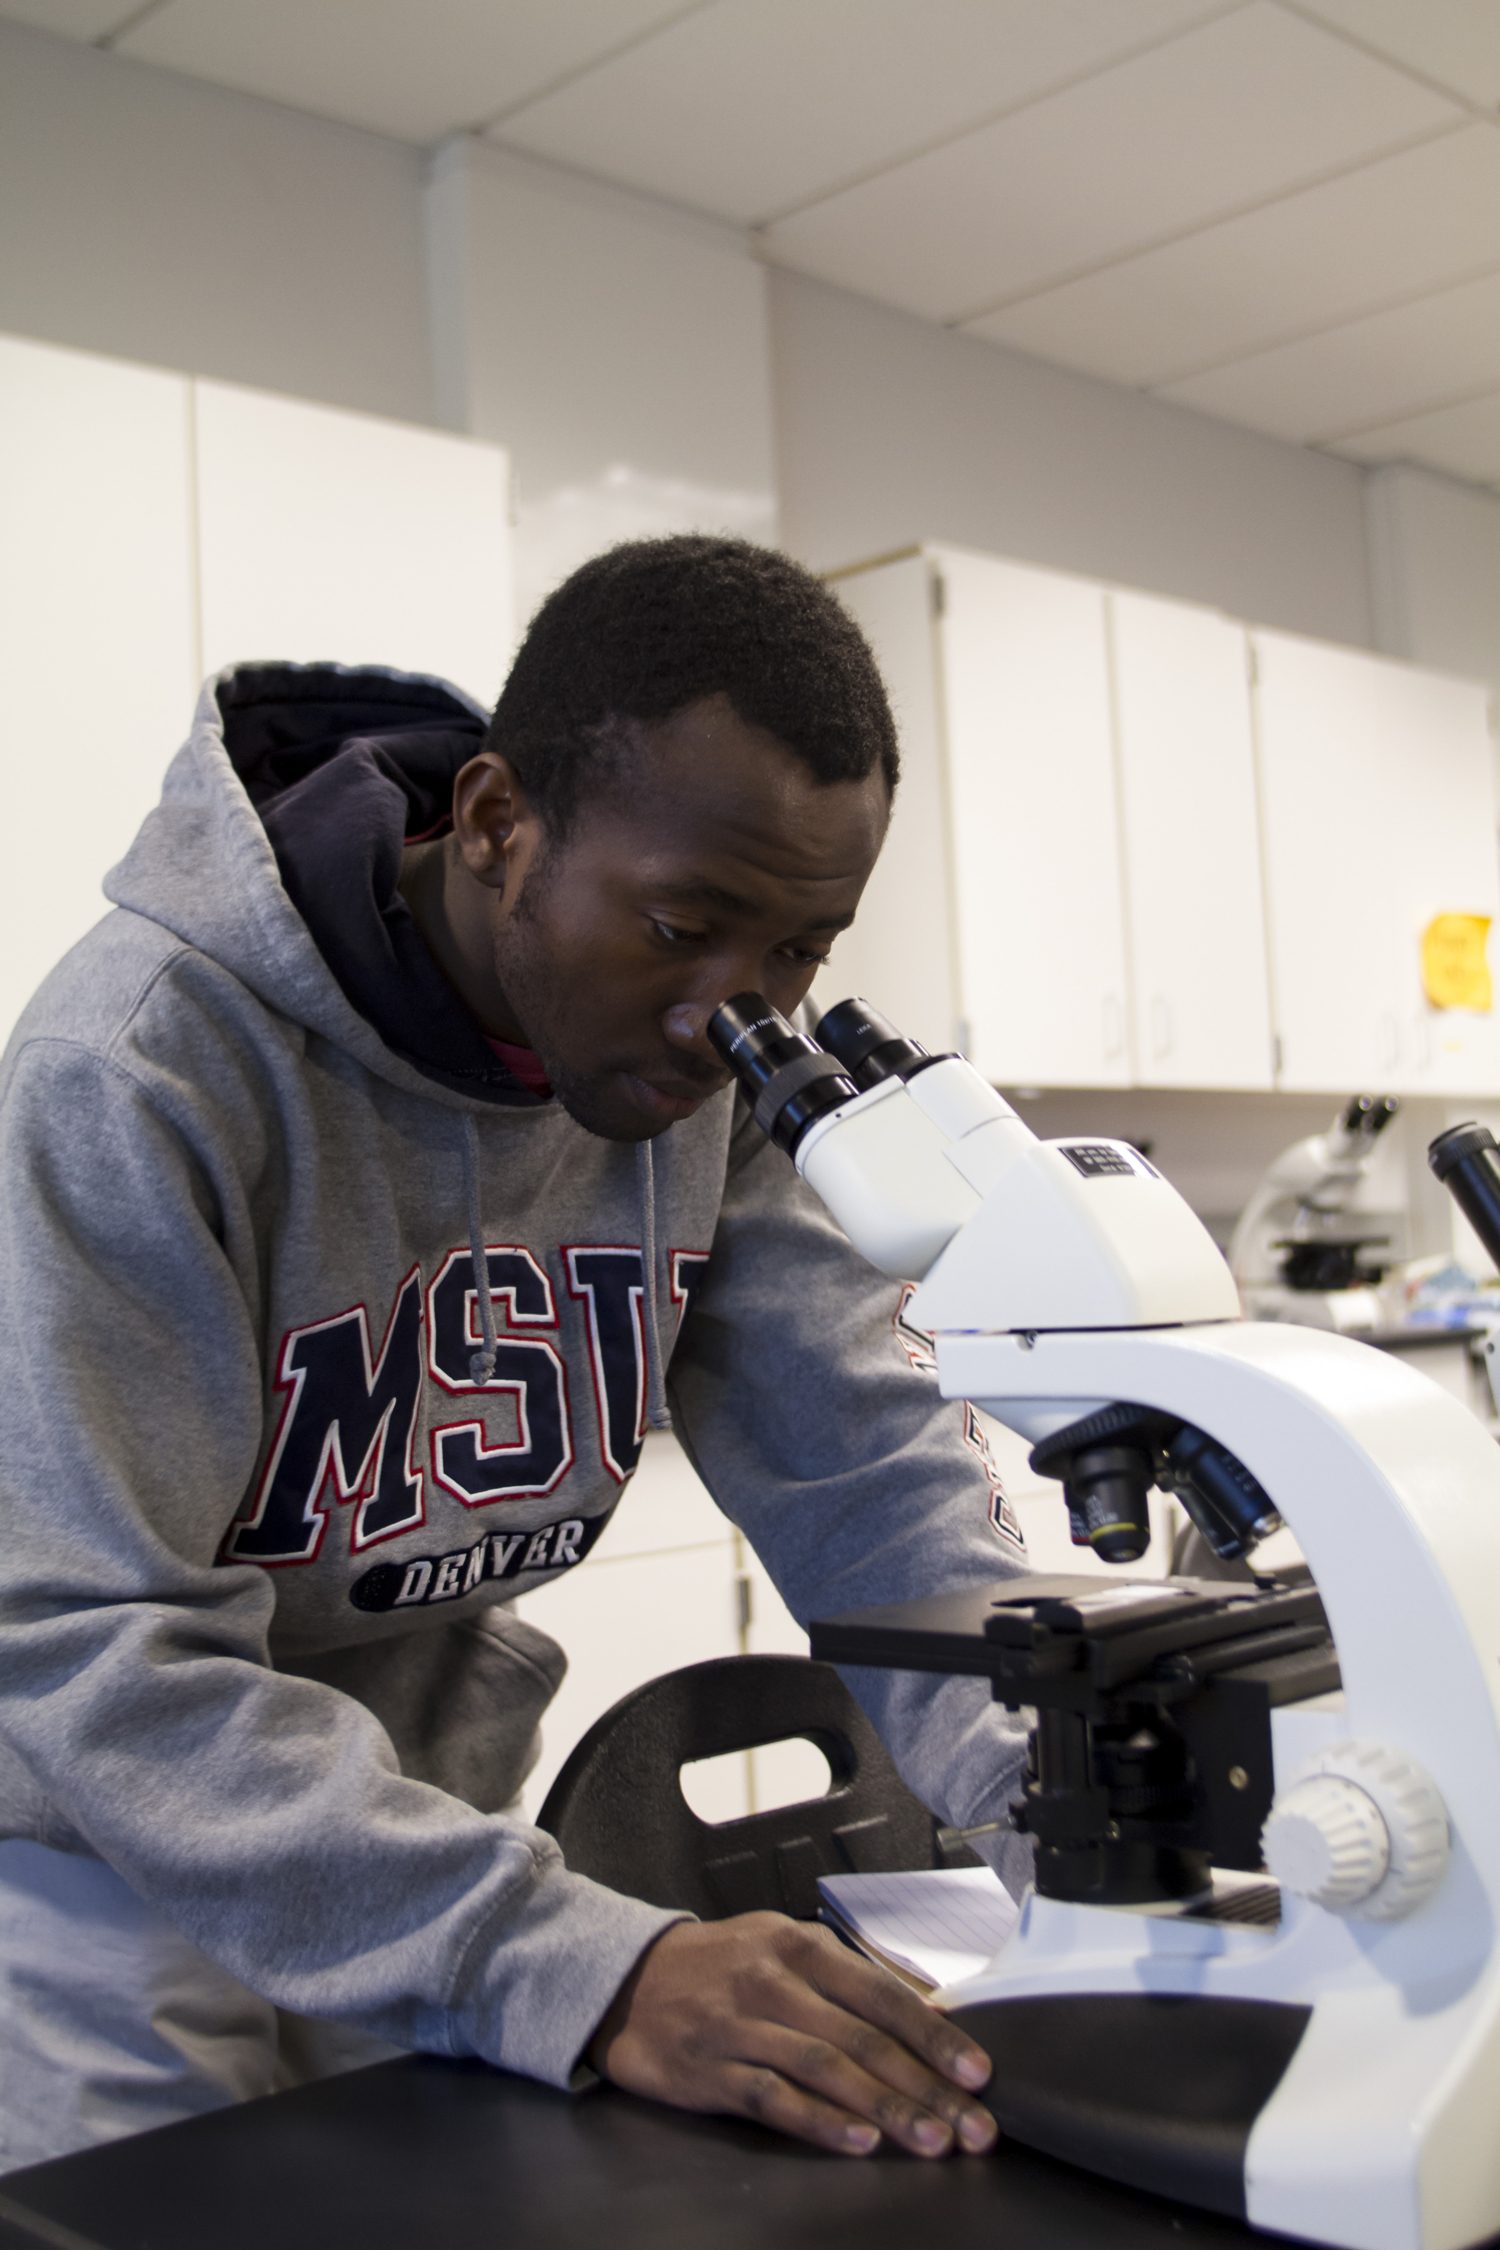 MSU Denver Student looking through a microscope